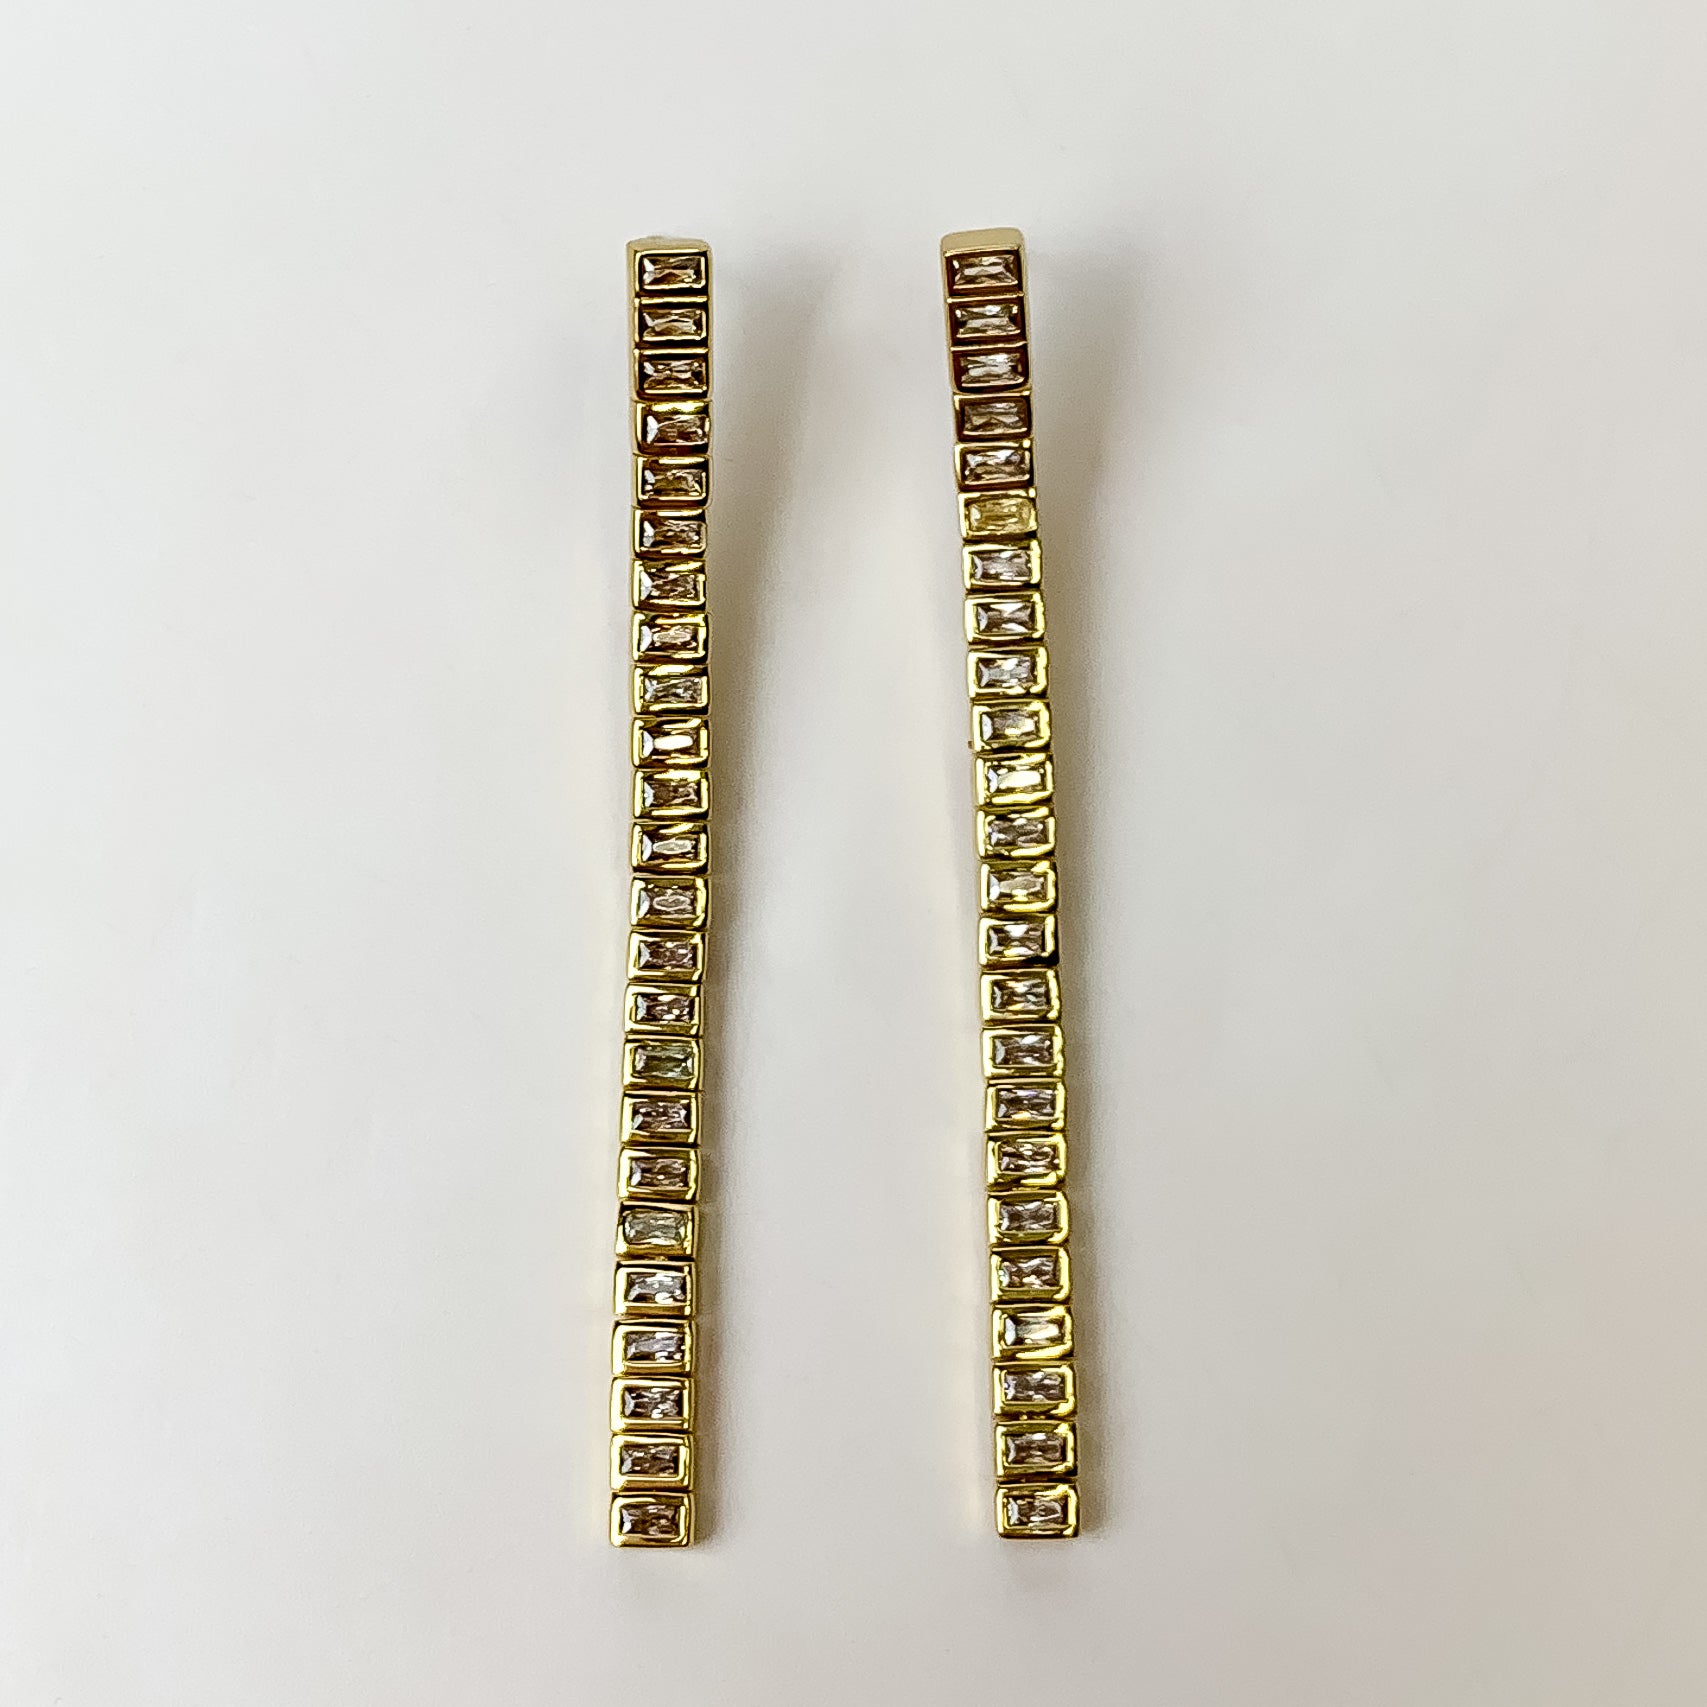 These Gracie Gold Long Tennis Linear Earrings in White by Kendra Scott are pictured on a white background.